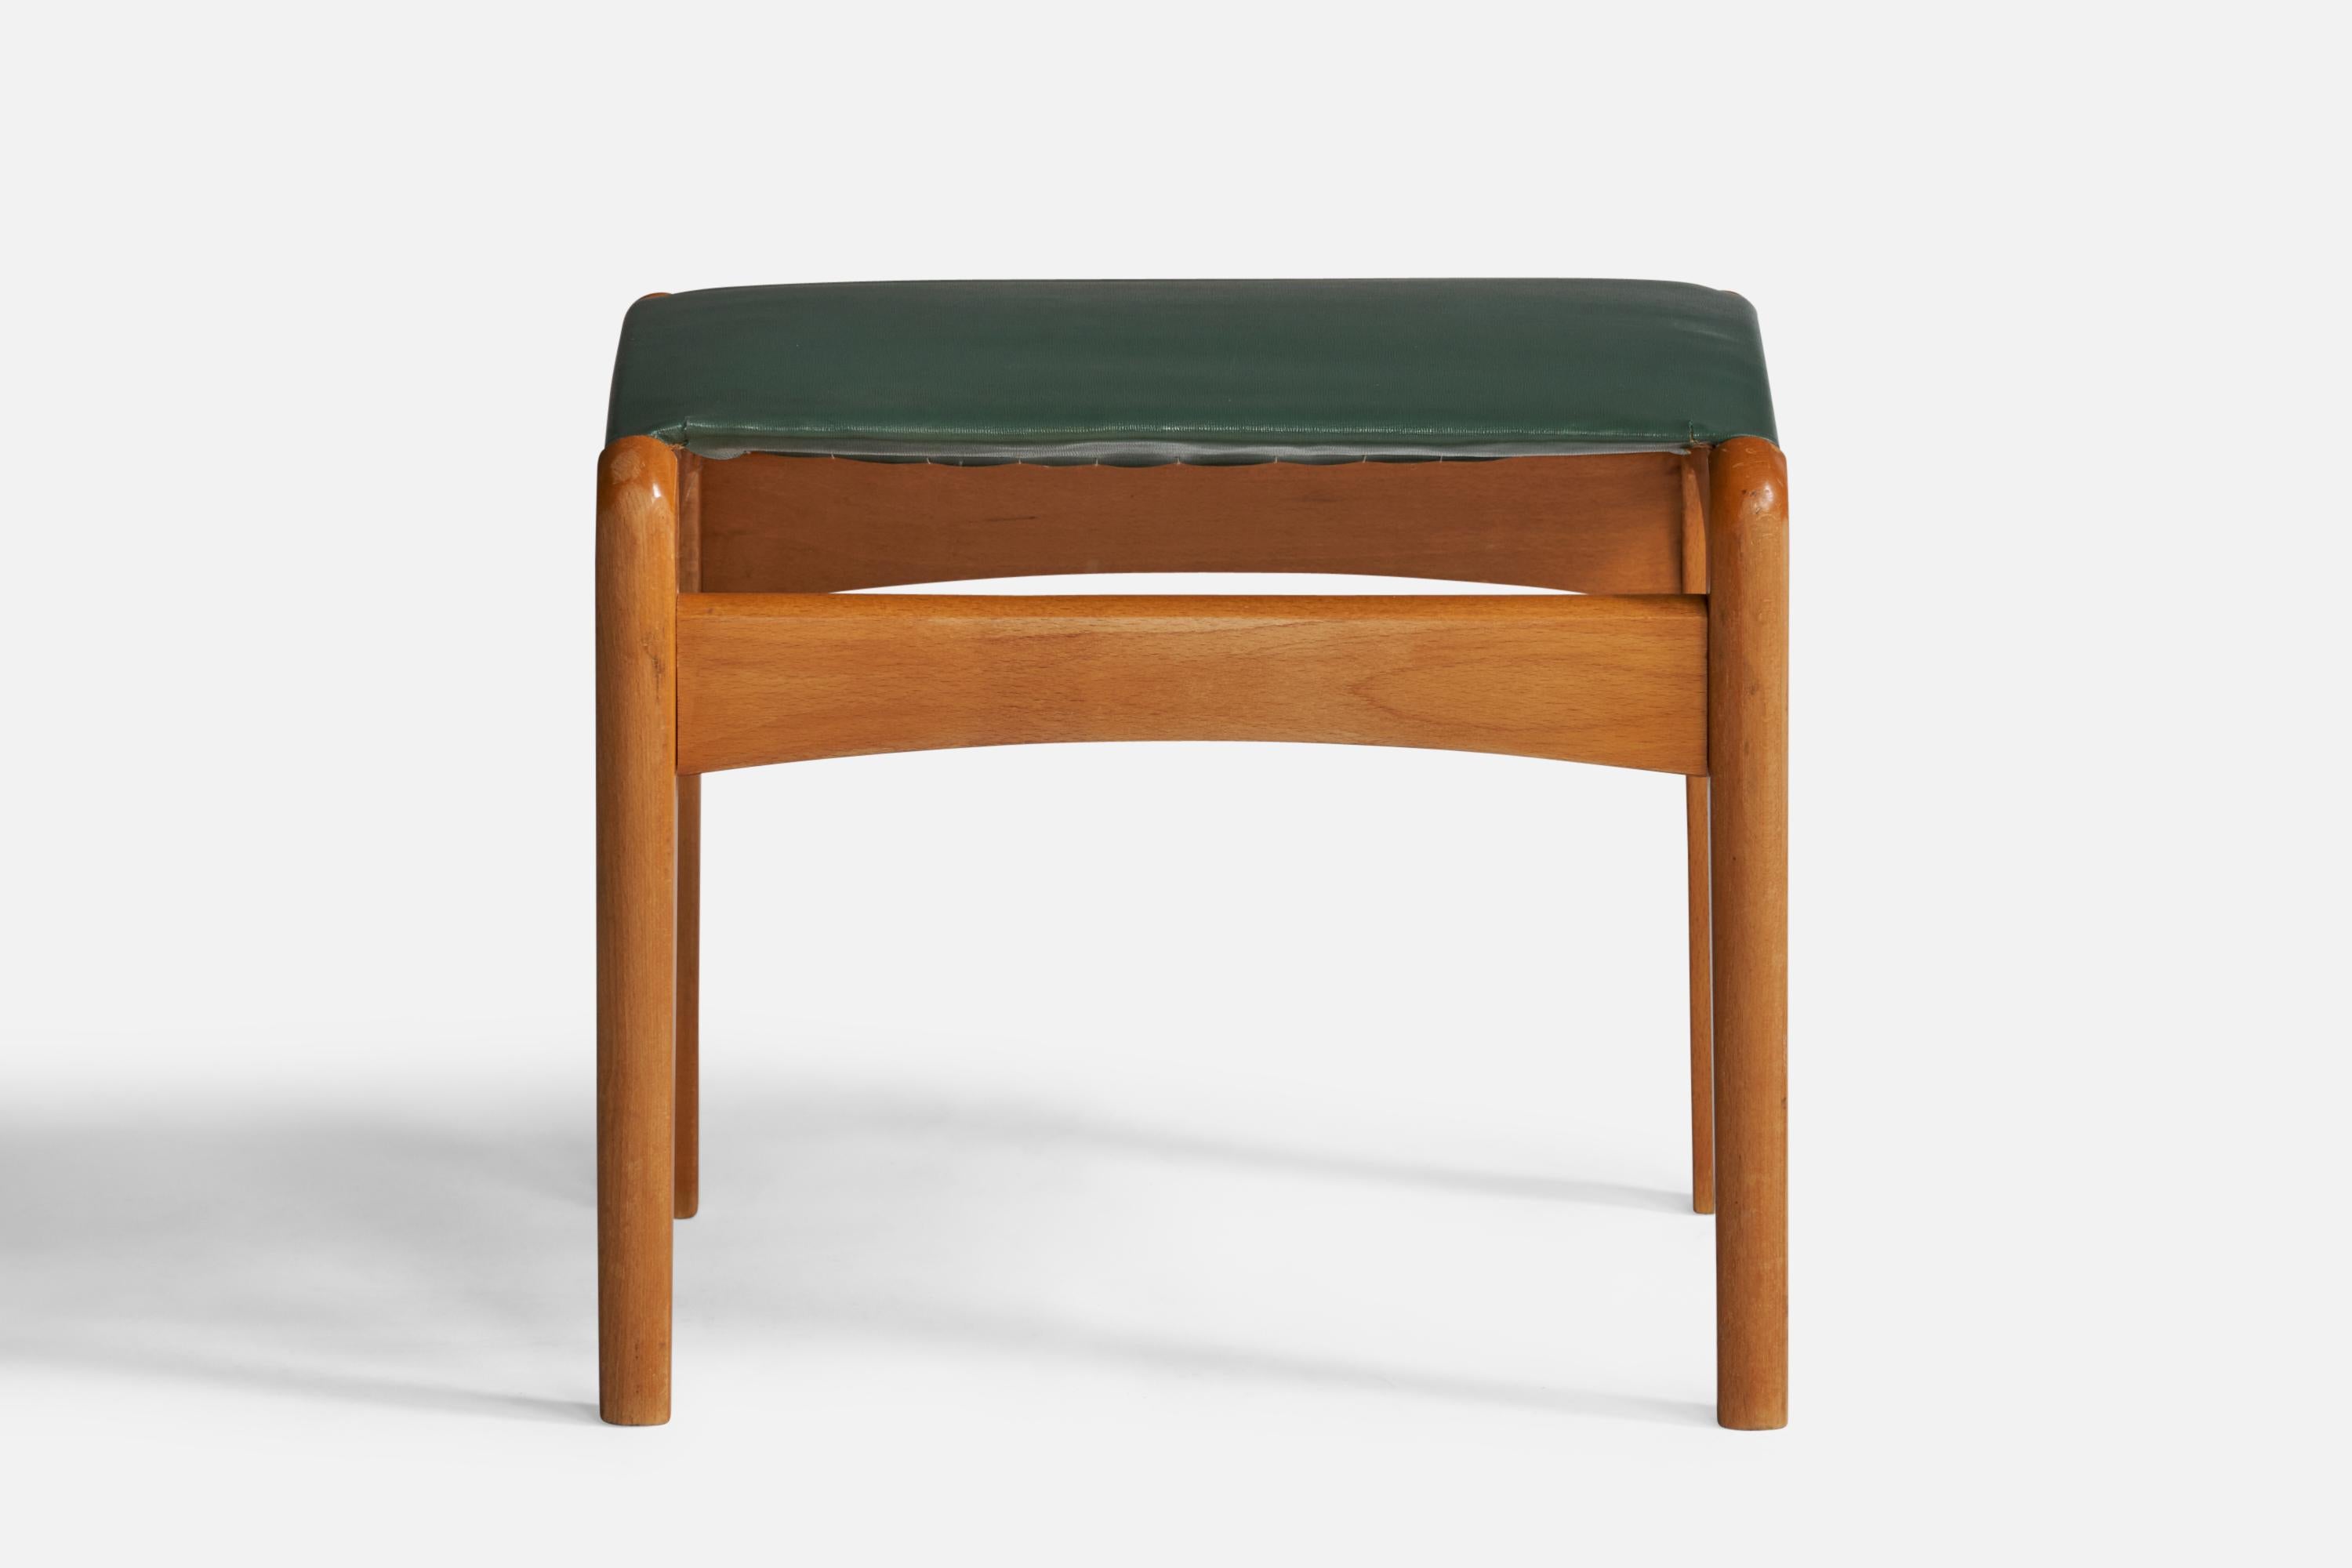 A green leather and beech stool designed and produced in Sweden, c. 1950s.

Seat height: 15.5”